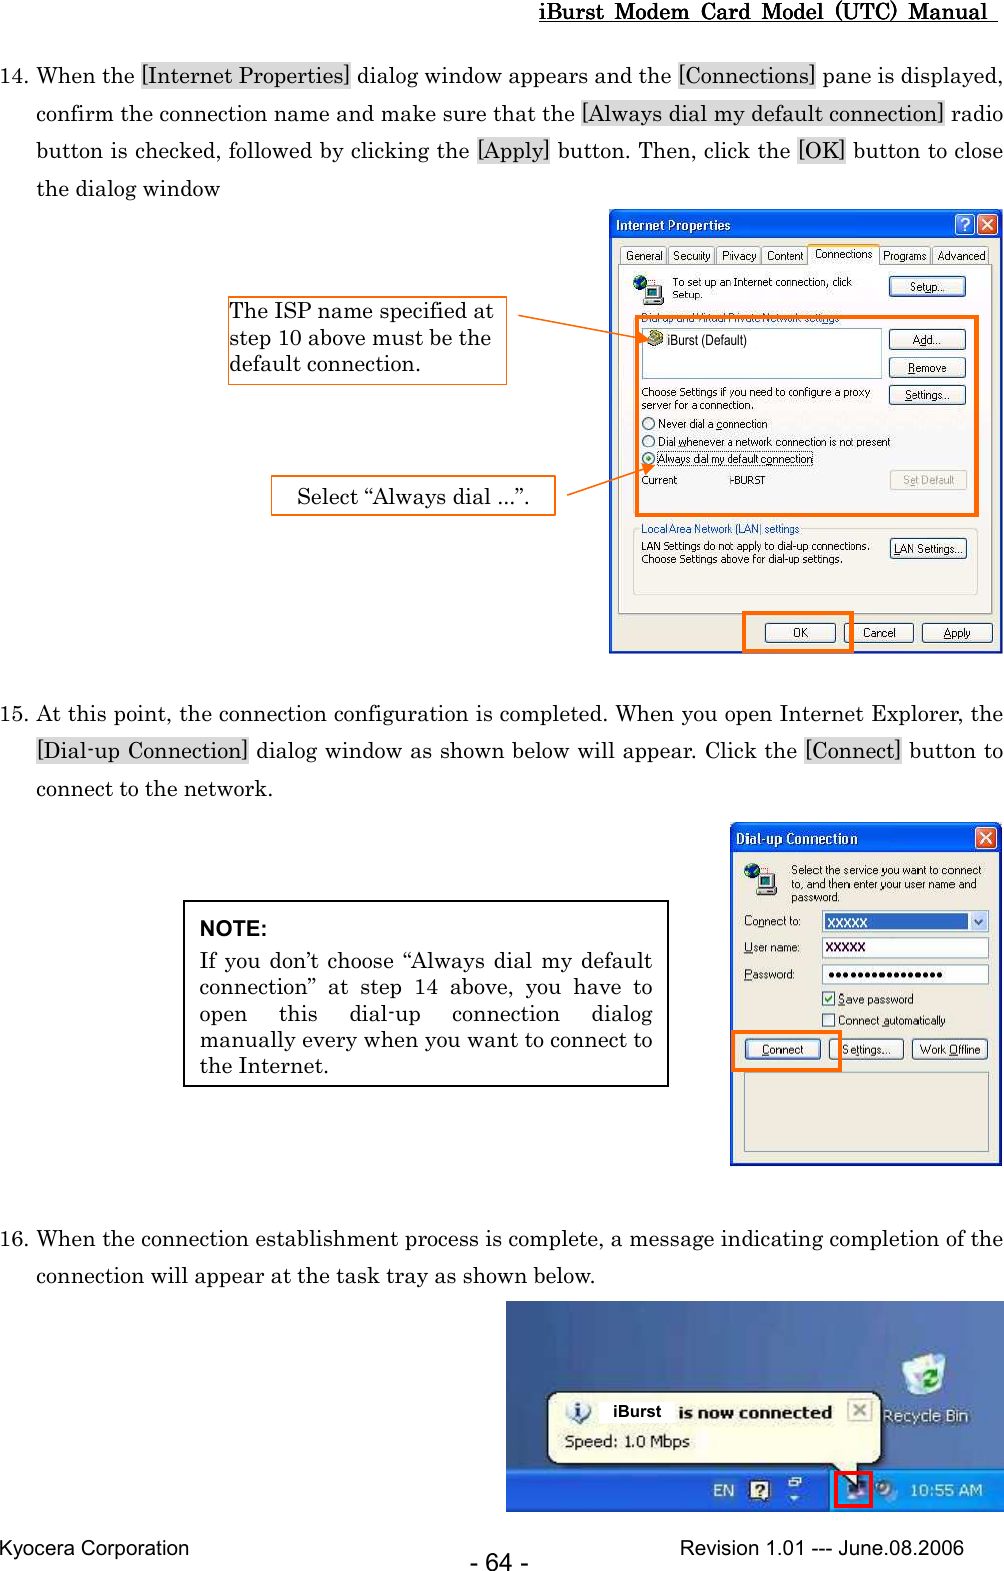 iBurst  Modem  Card  Model  (UTC)  Manual iBurst  Modem  Card  Model  (UTC)  Manual iBurst  Modem  Card  Model  (UTC)  Manual iBurst  Modem  Card  Model  (UTC)  Manual       Kyocera Corporation                                                                                              Revision 1.01 --- June.08.2006 - 64 - 14. When the [Internet Properties] dialog window appears and the [Connections] pane is displayed, confirm the connection name and make sure that the [Always dial my default connection] radio button is checked, followed by clicking the [Apply] button. Then, click the [OK] button to close the dialog window   15. At this point, the connection configuration is completed. When you open Internet Explorer, the [Dial-up Connection] dialog window as shown below will appear. Click the [Connect] button to connect to the network.   16. When the connection establishment process is complete, a message indicating completion of the connection will appear at the task tray as shown below.  Select “Always dial ...”. The ISP name specified at step 10 above must be the default connection. NOTE: If you don’t choose “Always dial my default connection”  at  step  14  above,  you  have  to open  this  dial-up  connection  dialog manually every when you want to connect to the Internet. iBurst iBurst (Default) 